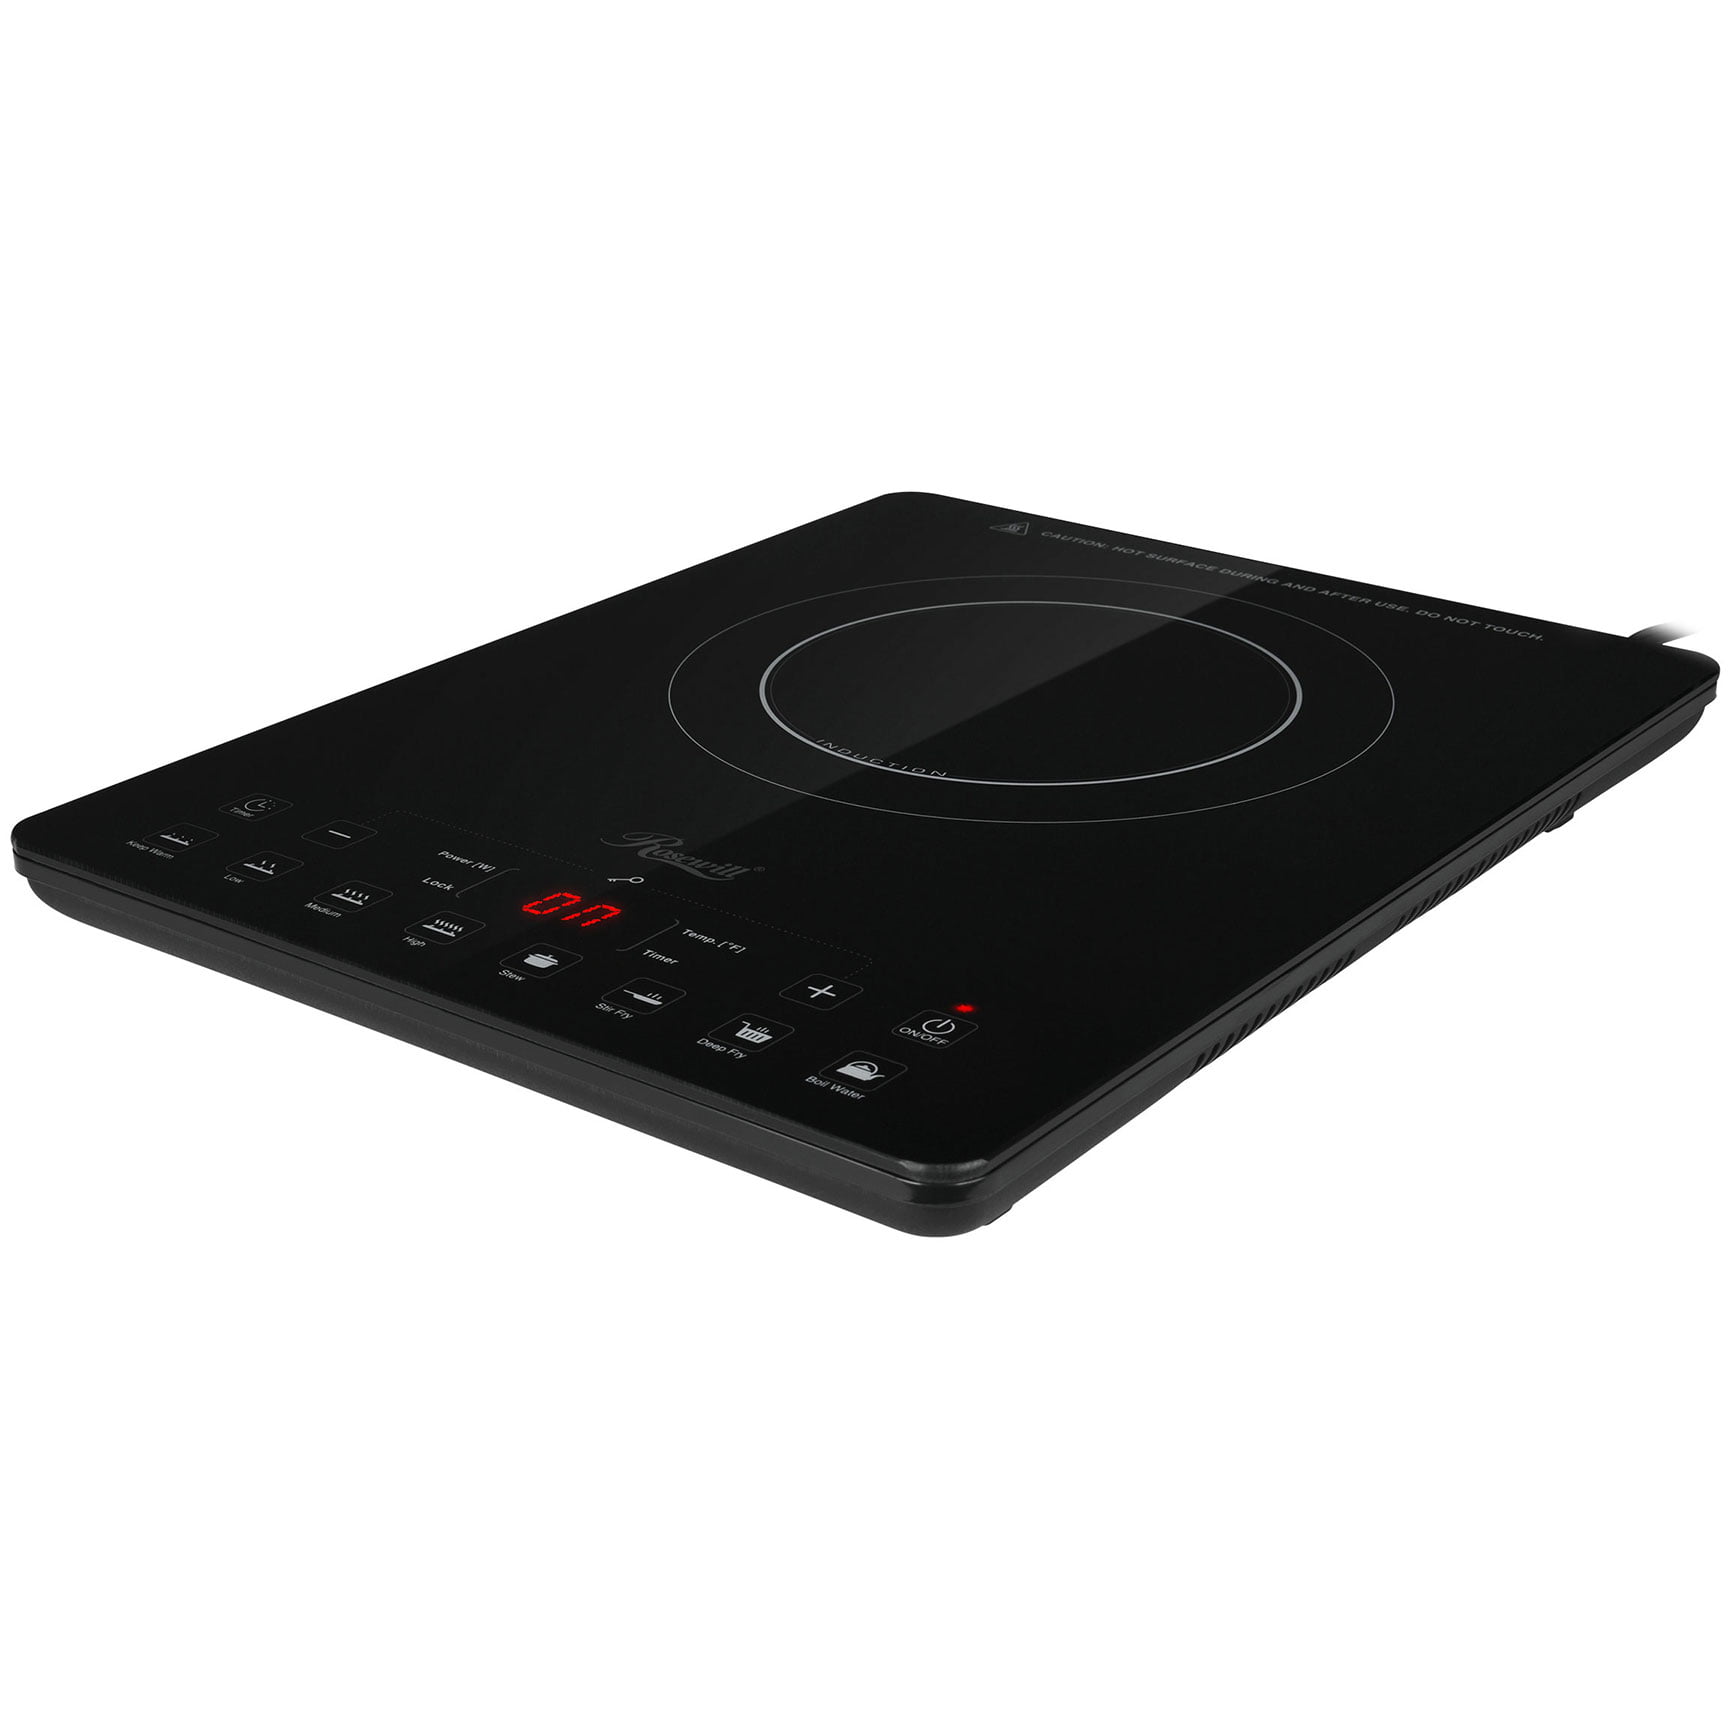 RecPro RV Induction Cooktop | 1300 Watt Single Burner | Electric Range for Countertop Use | Portable